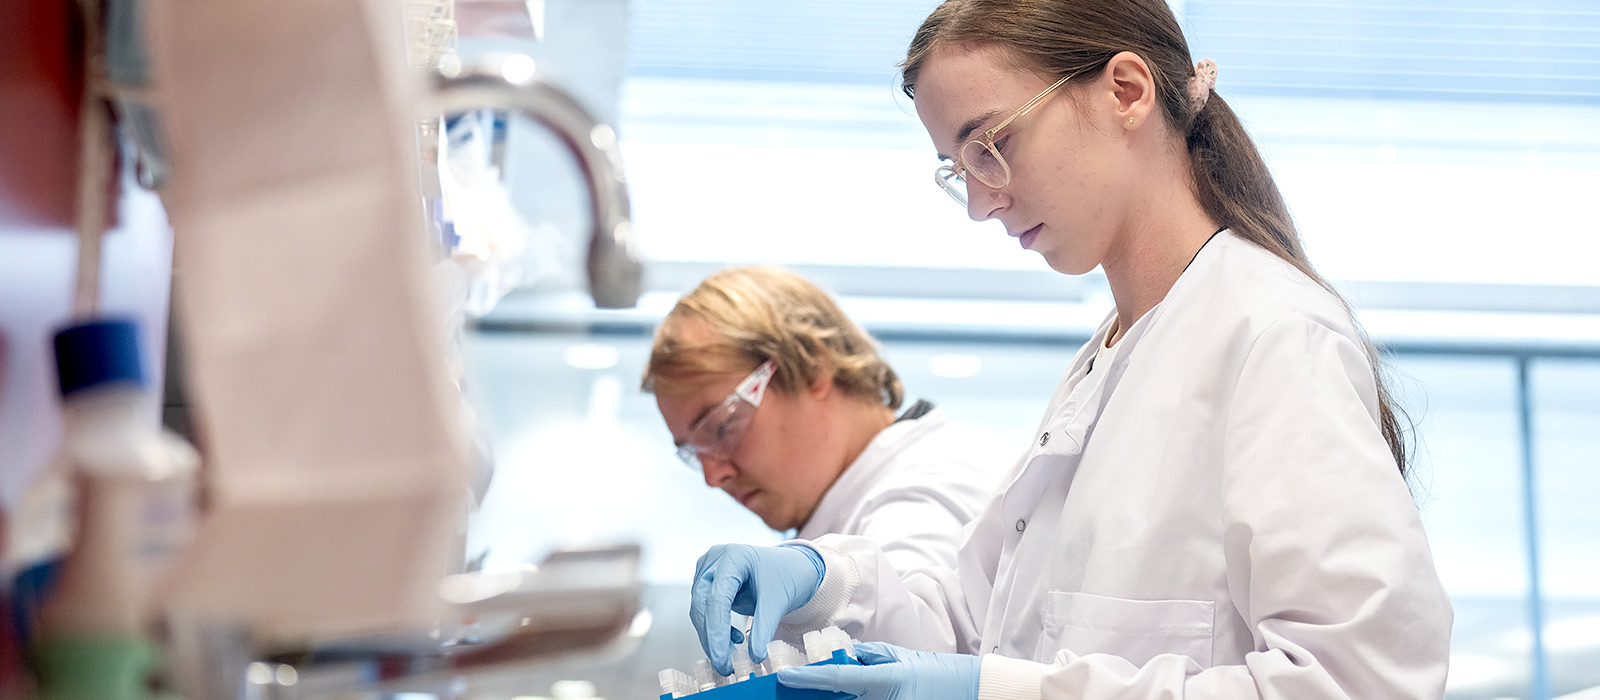 Postgraduate students working at the Jenner Institute in profile wearing lab coats and blue gloves